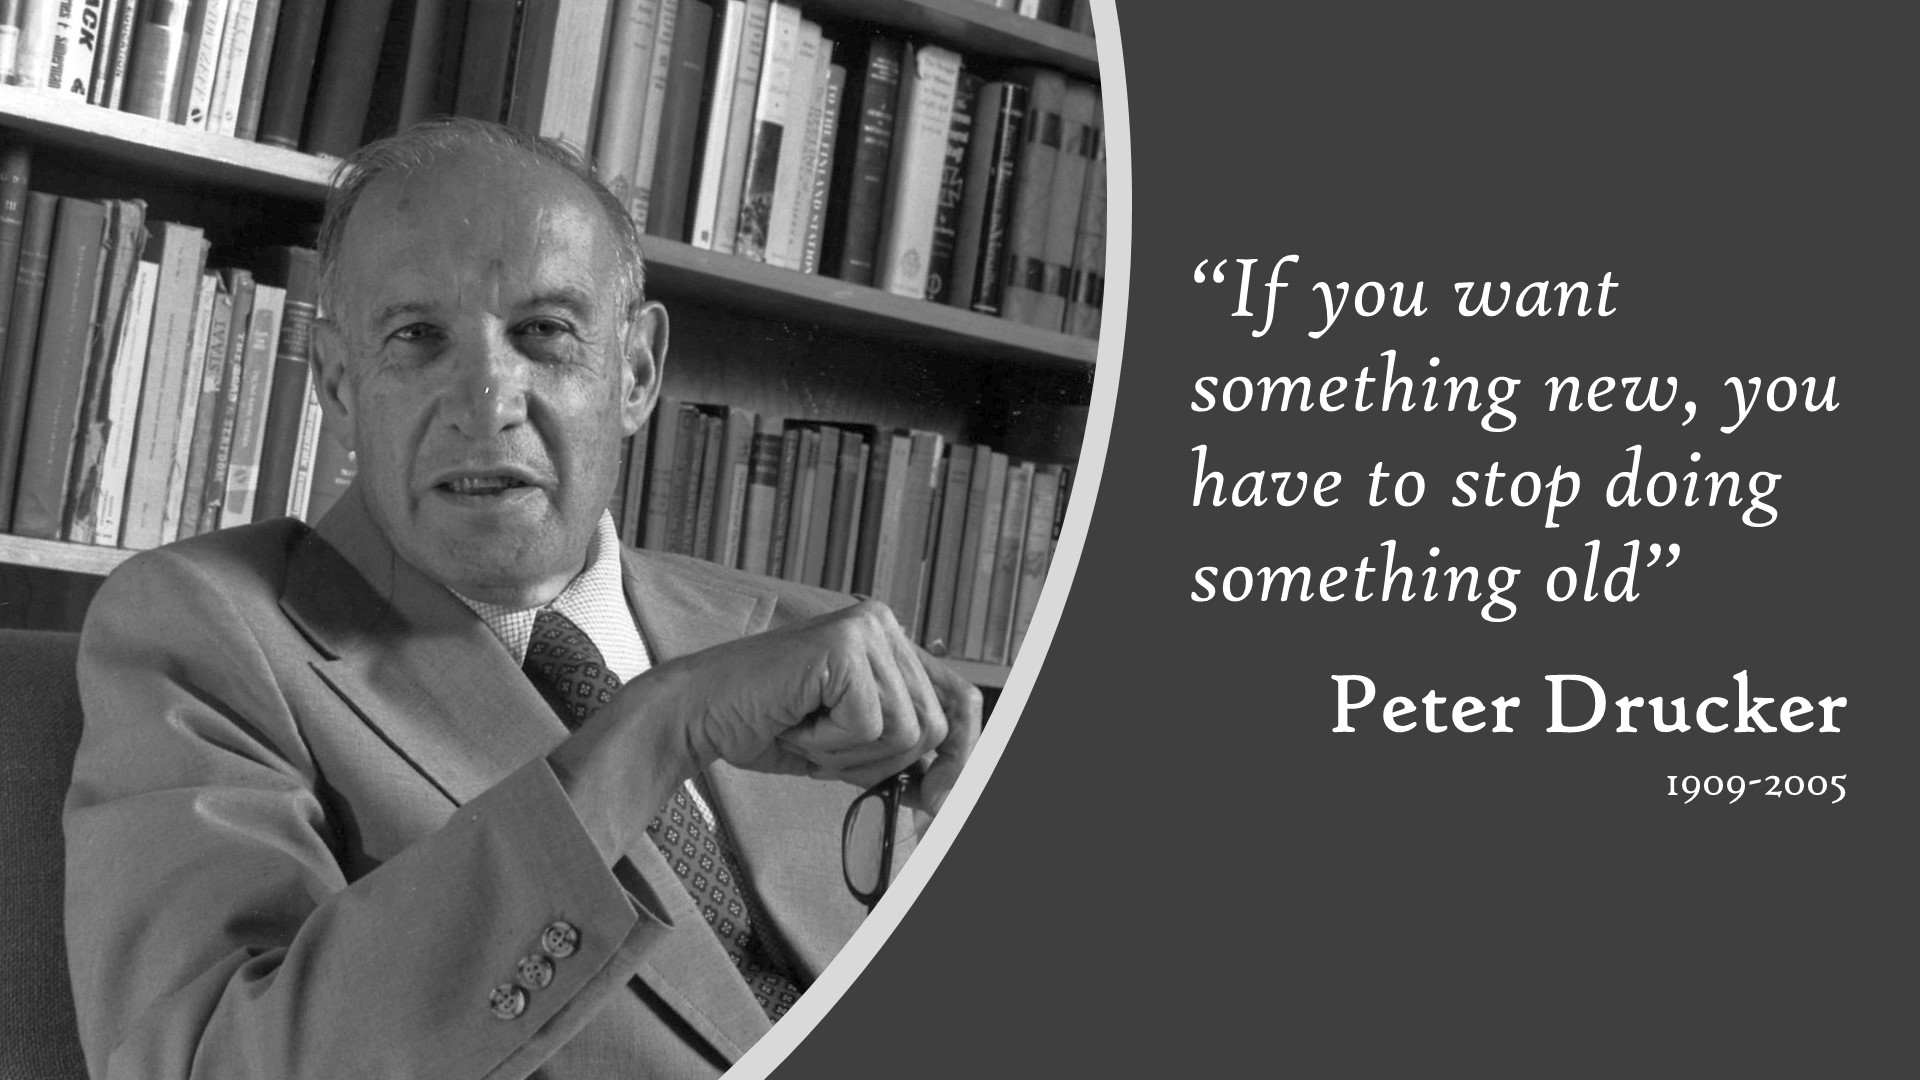 If you want something new, you have to stop doing something old. [Peter Drucker]